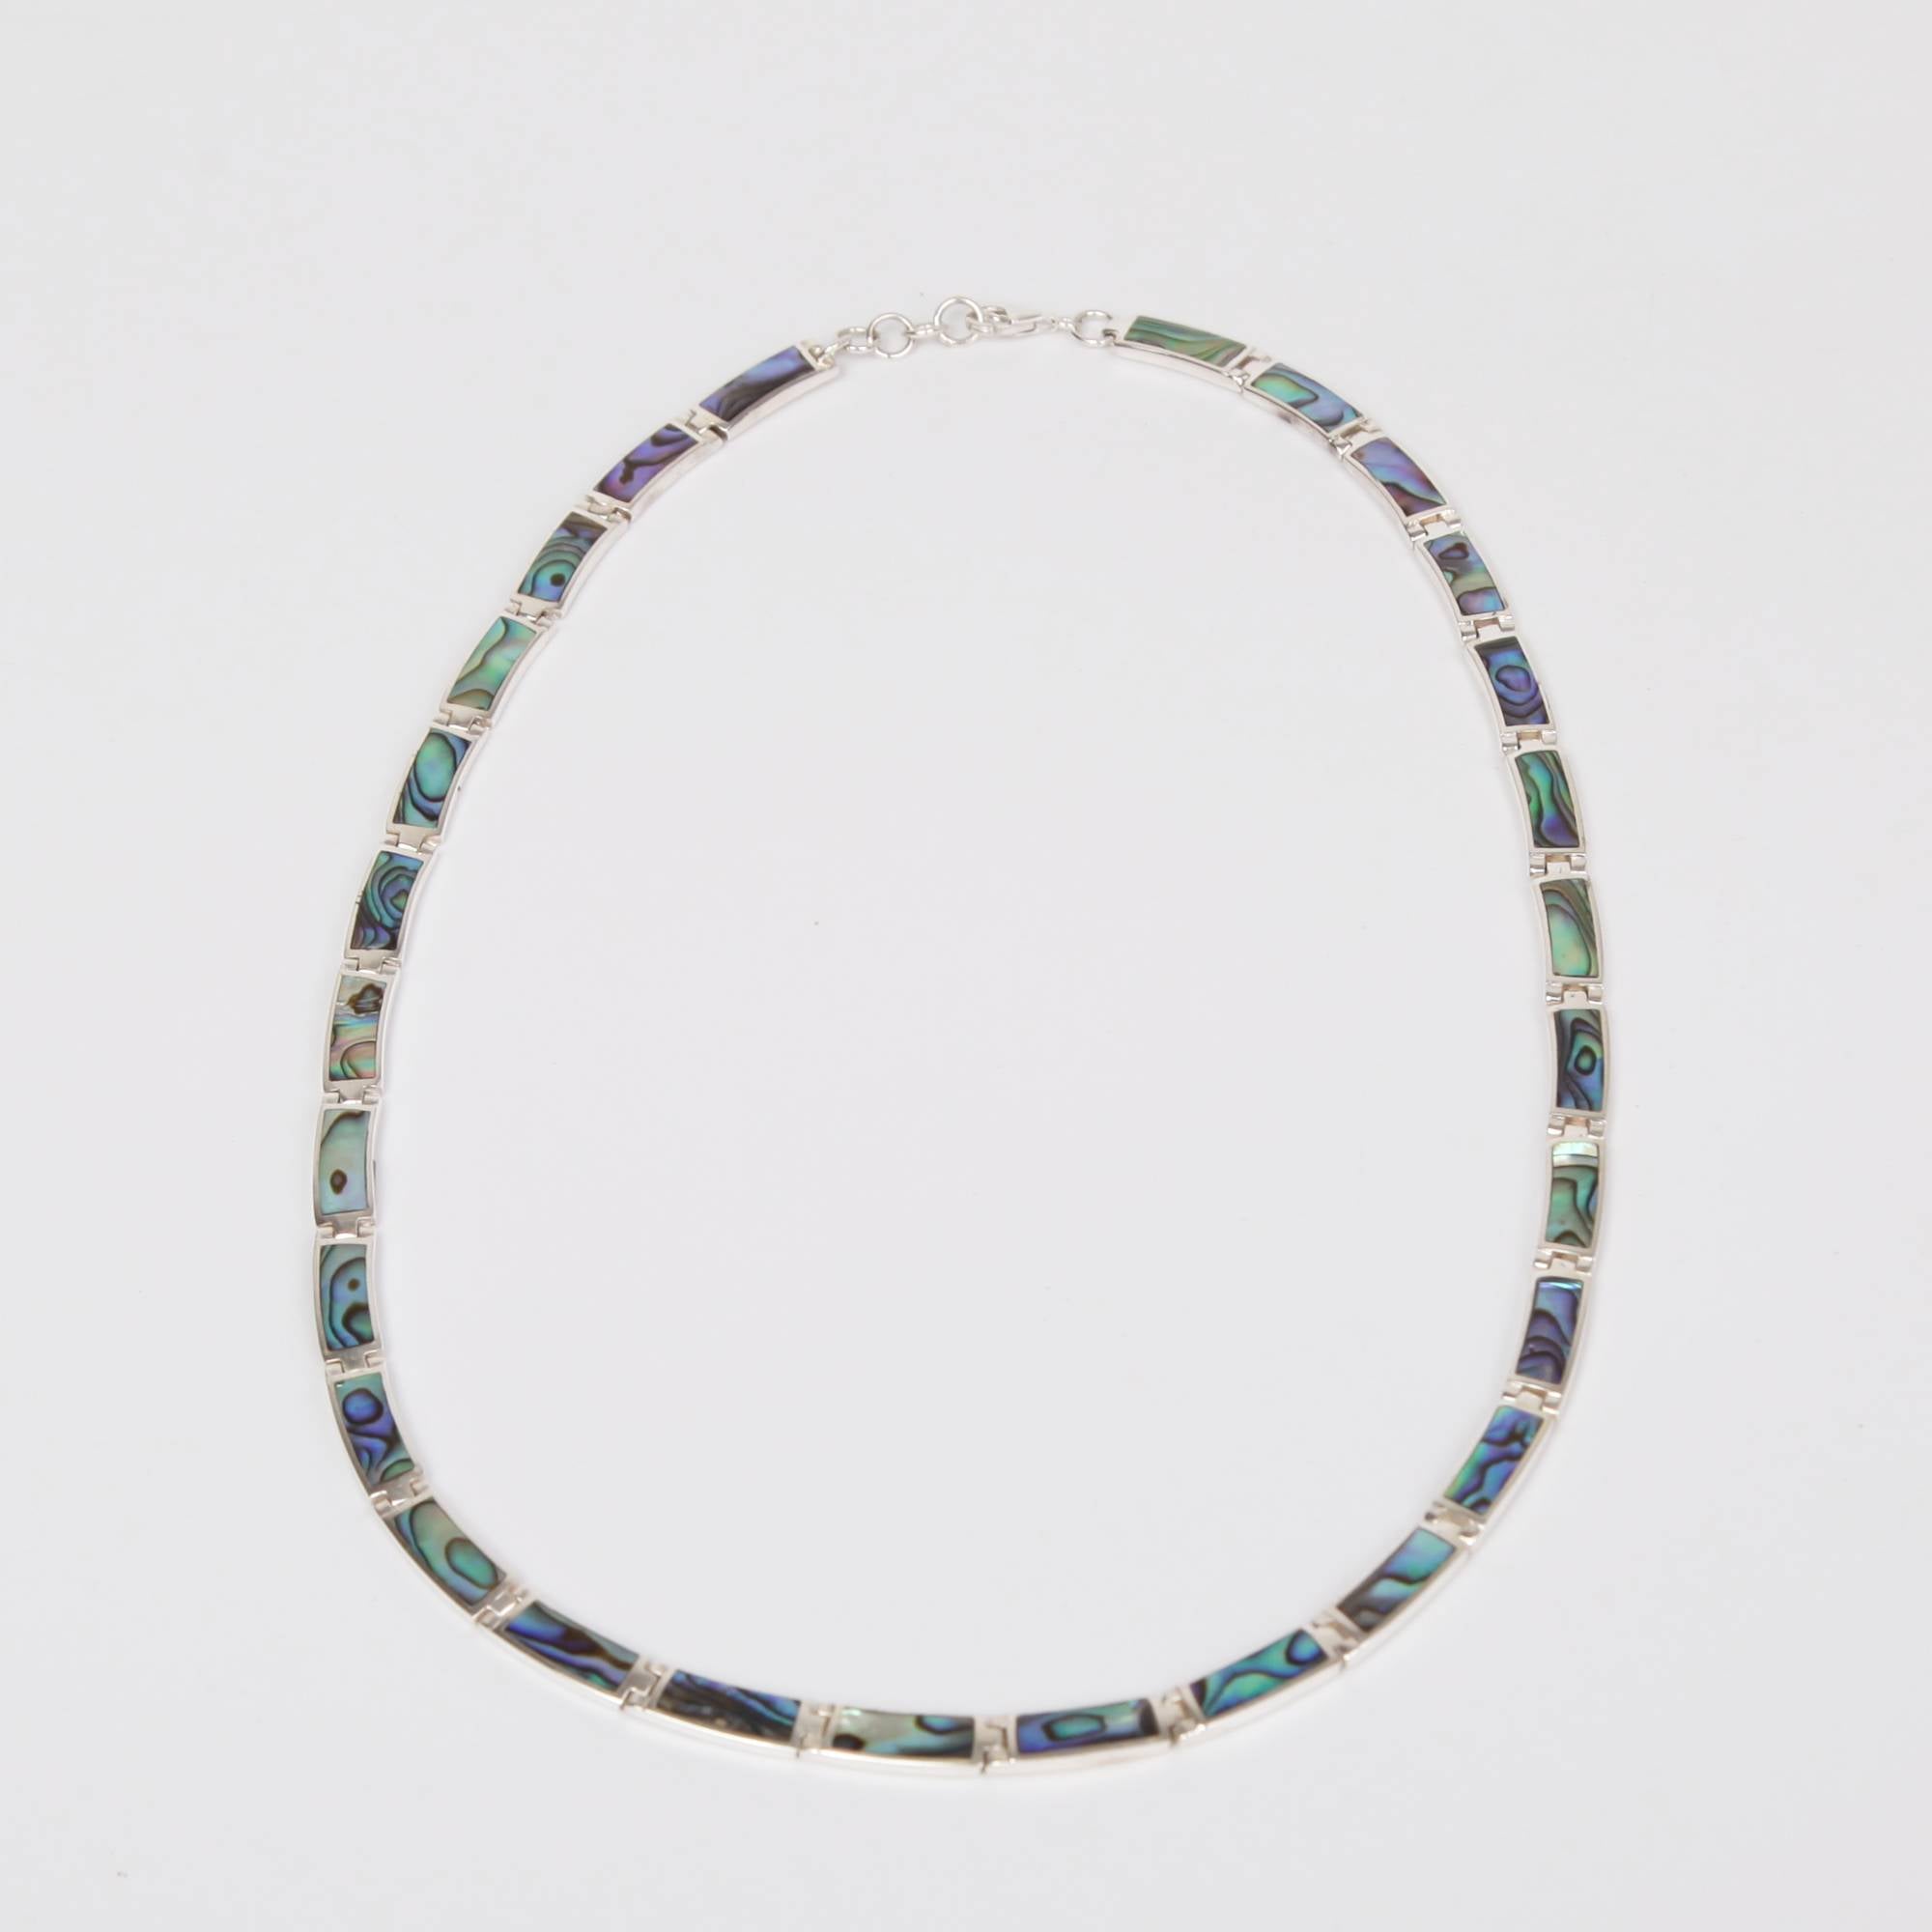 Paua Shell (Rainbow Abalone) Necklace with Sterling Silver